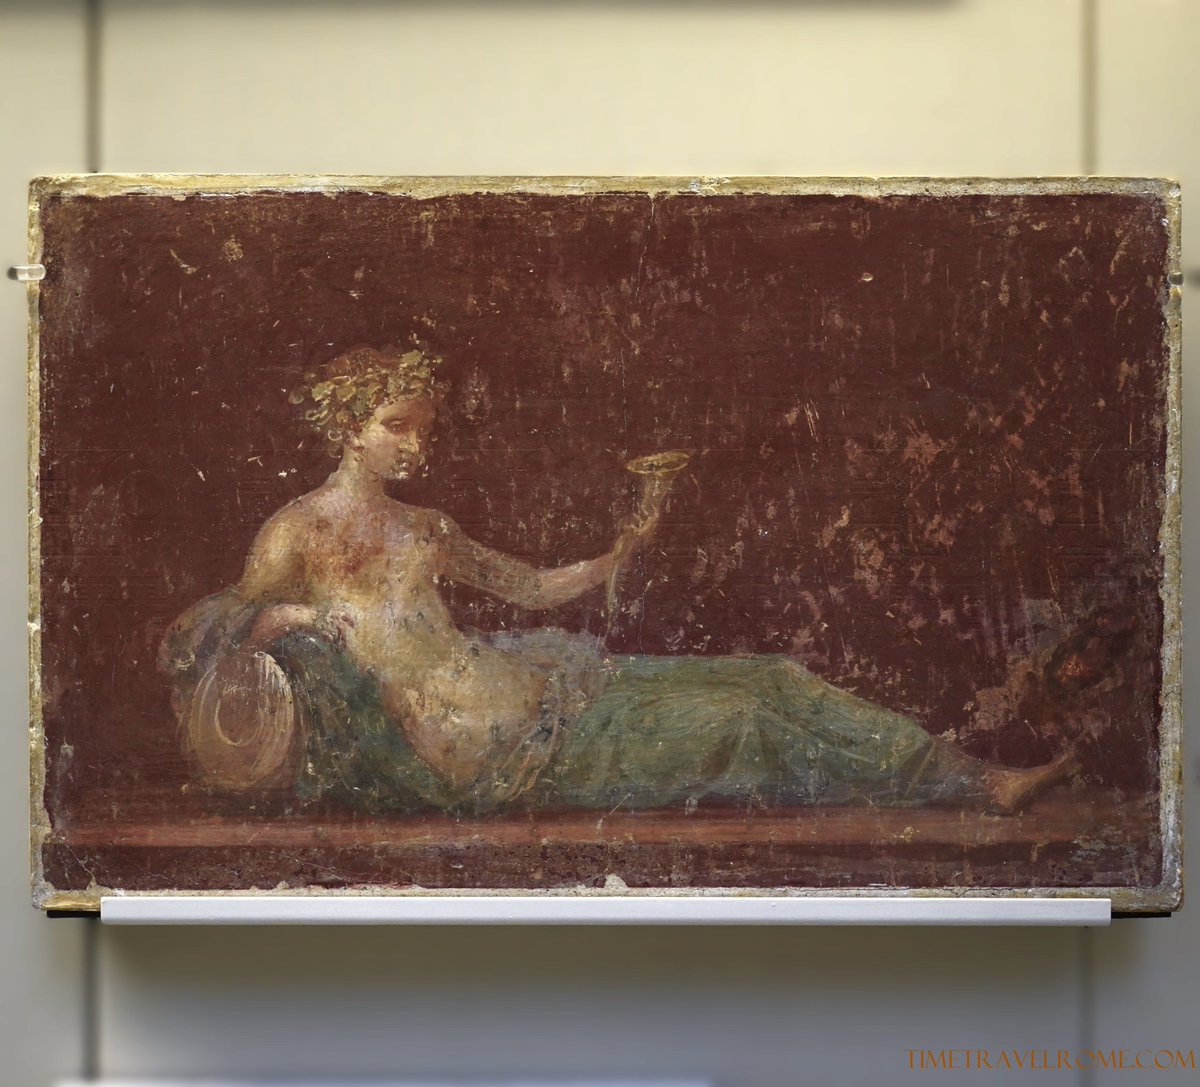 🪔 For #FrescoFriday: a wall-painting with a reclining Naiad, drinking from a horn. Dated to AD 30-50, it was found at a Roman villa at Campo Varano, #Stabiae. Now in the BM. 📸 me